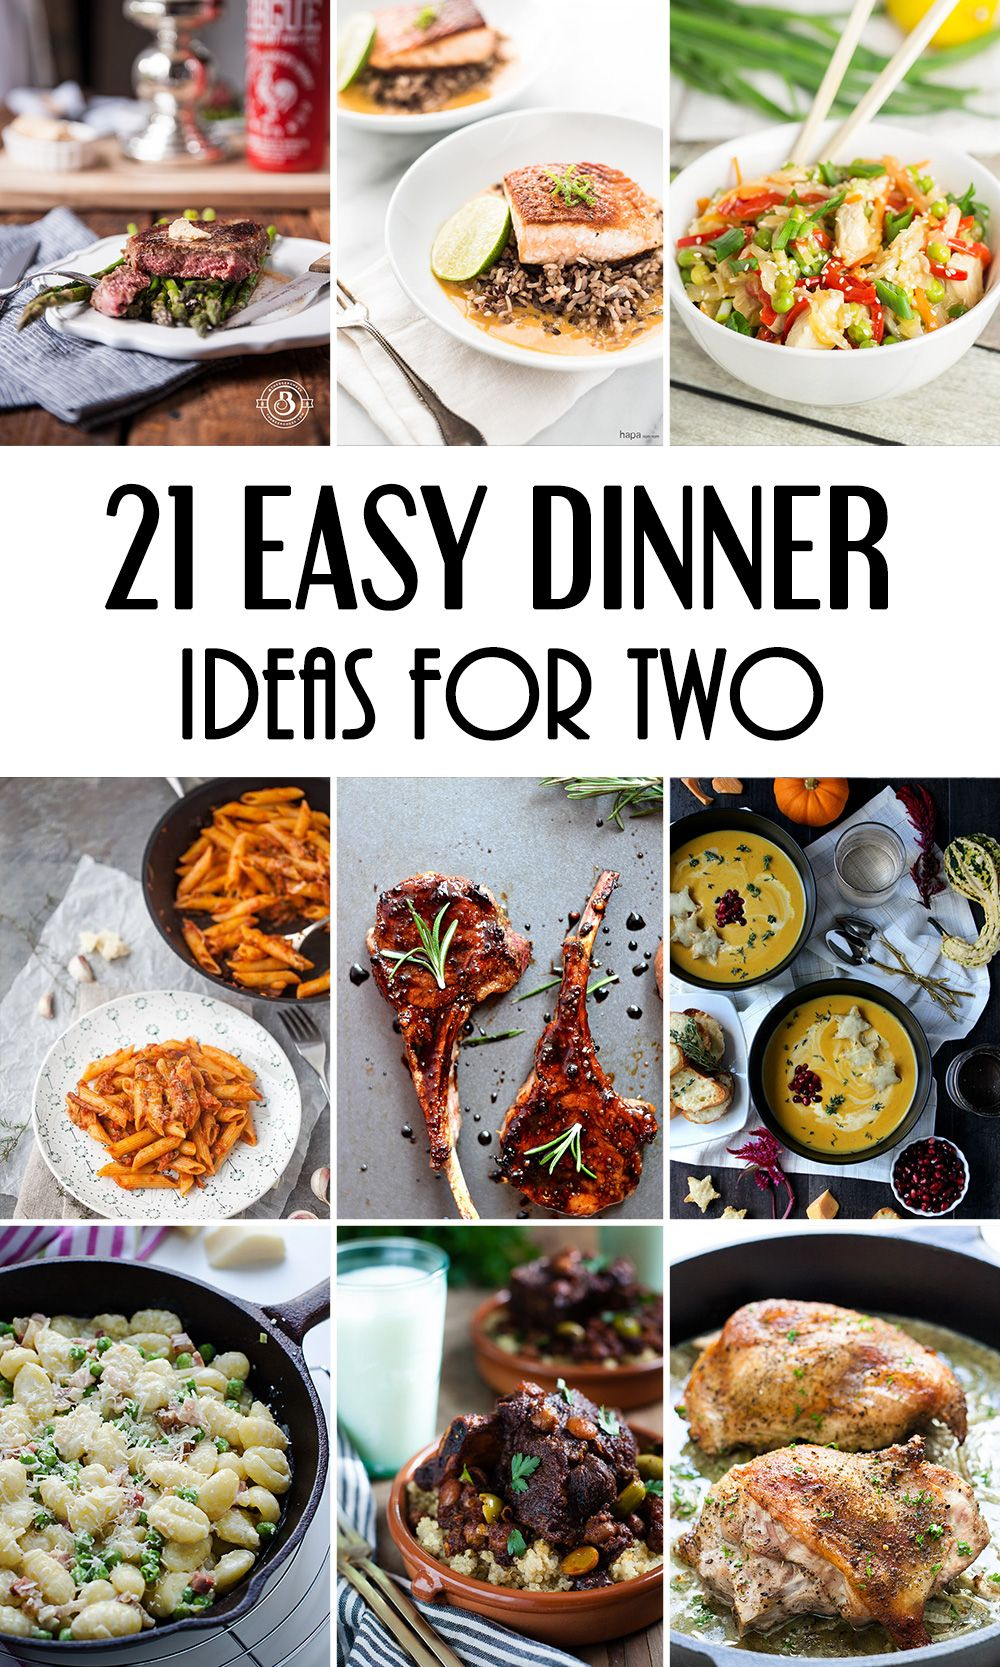 10 Beautiful Ideas For Dinner Tonight For Two 21 easy dinner ideas for two that will impress your loved one food 2022